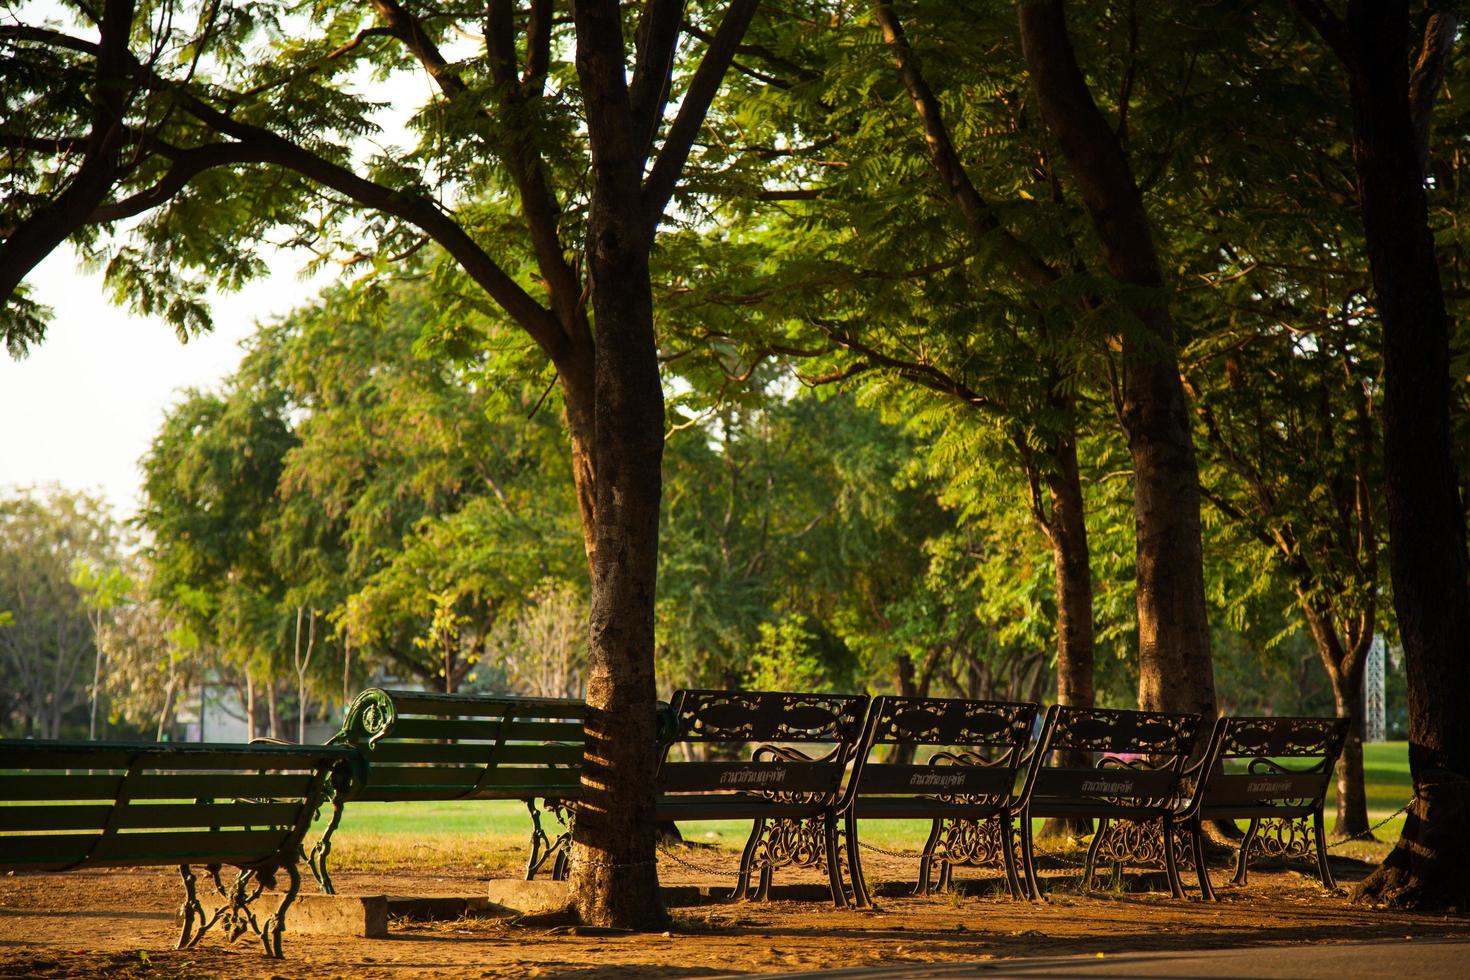 Benches in the park photo